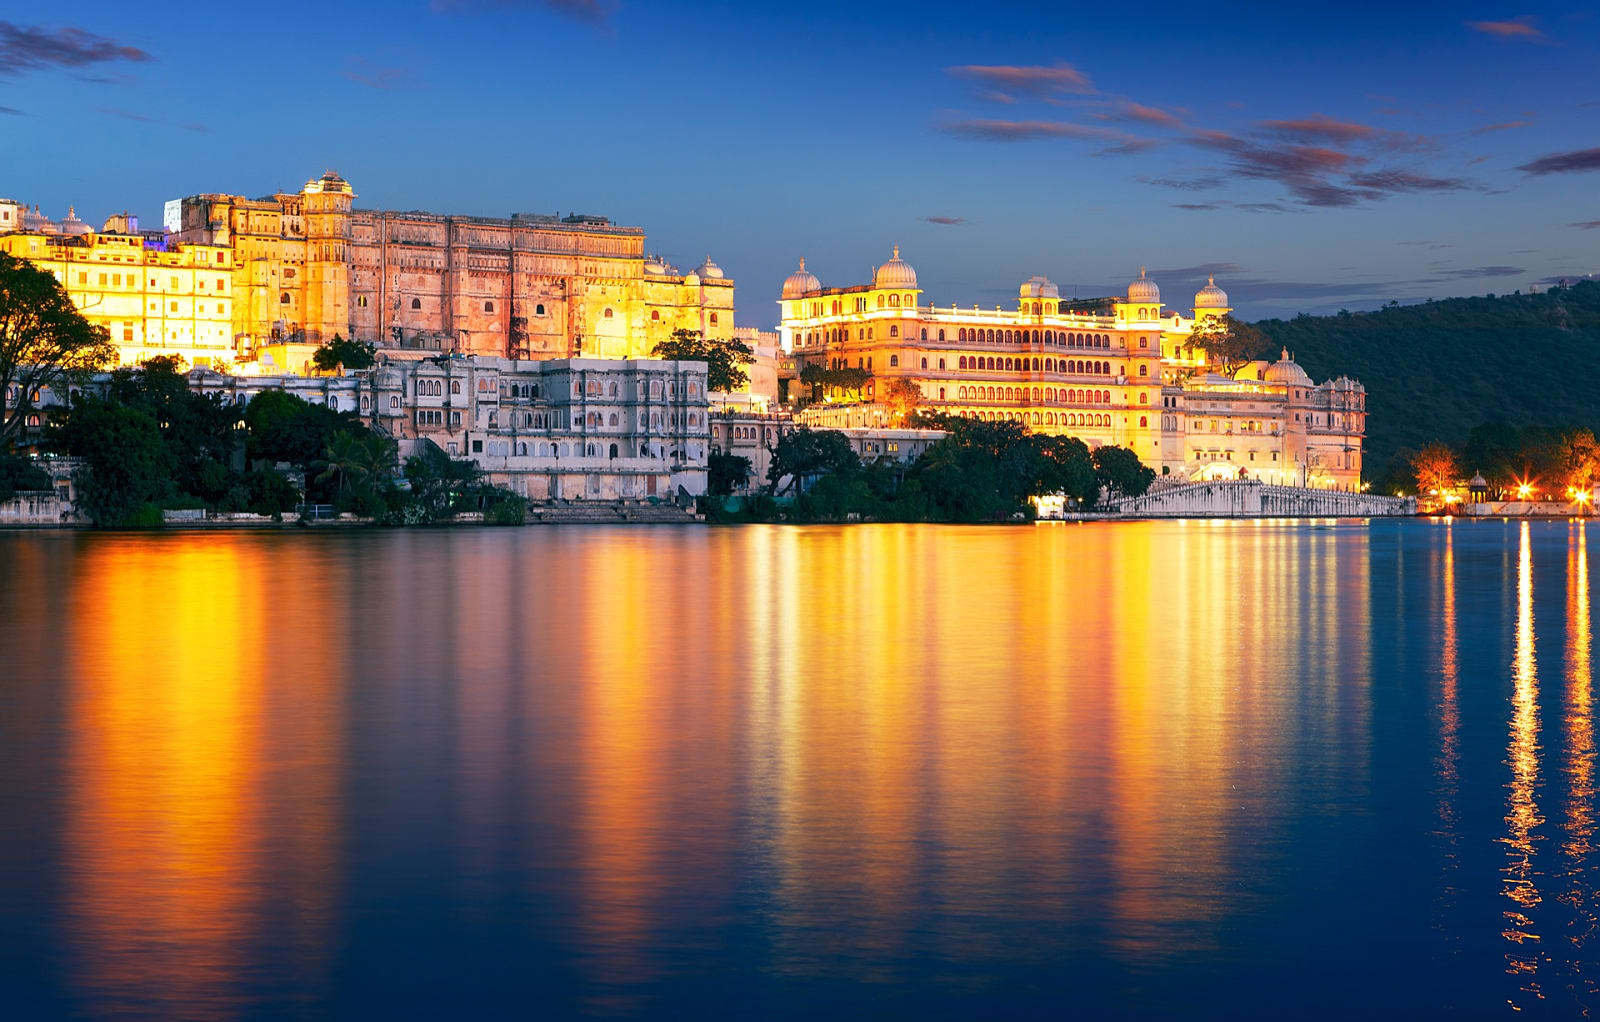 udaipur travel services